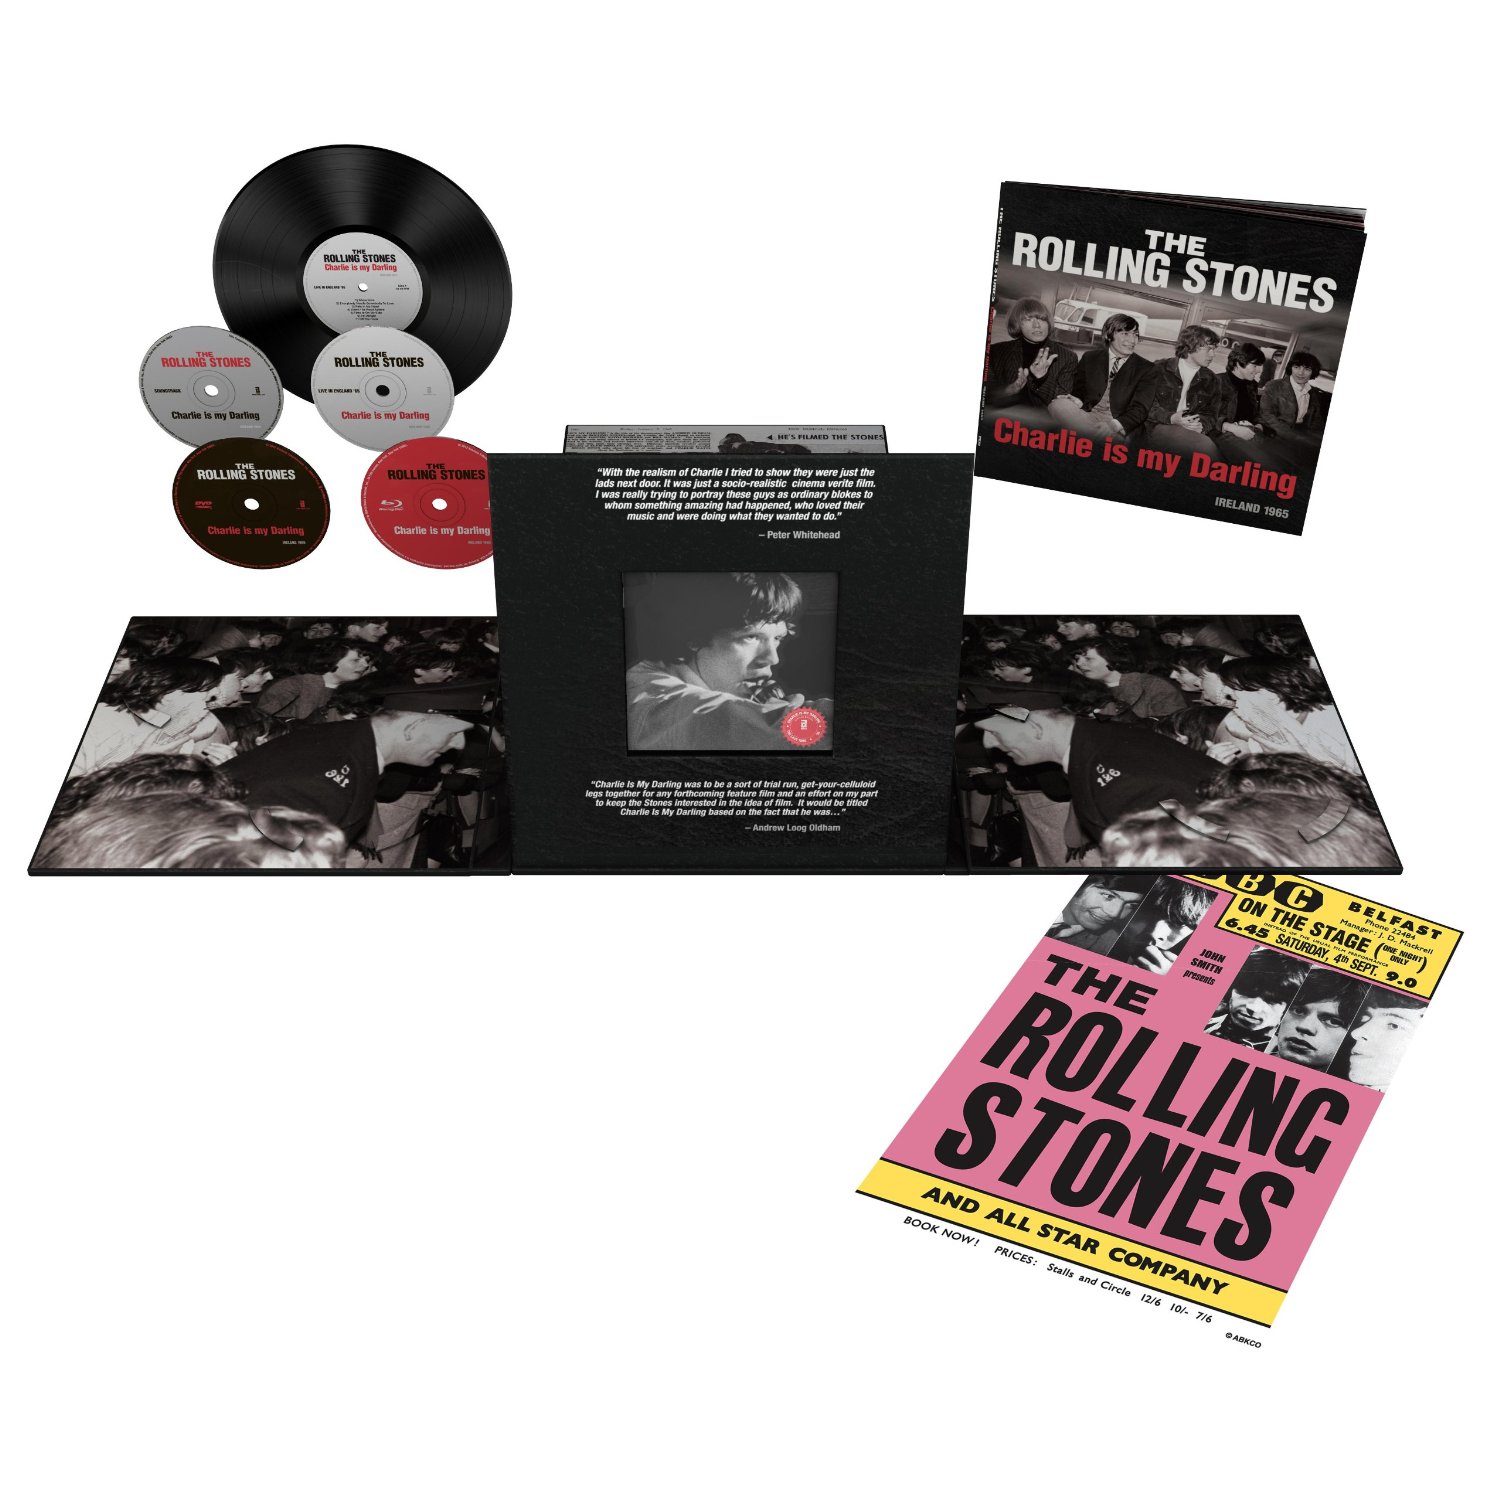 ROLLING STONES - CHARLIE IS MY DARLING - COLLECTORS' EDITION